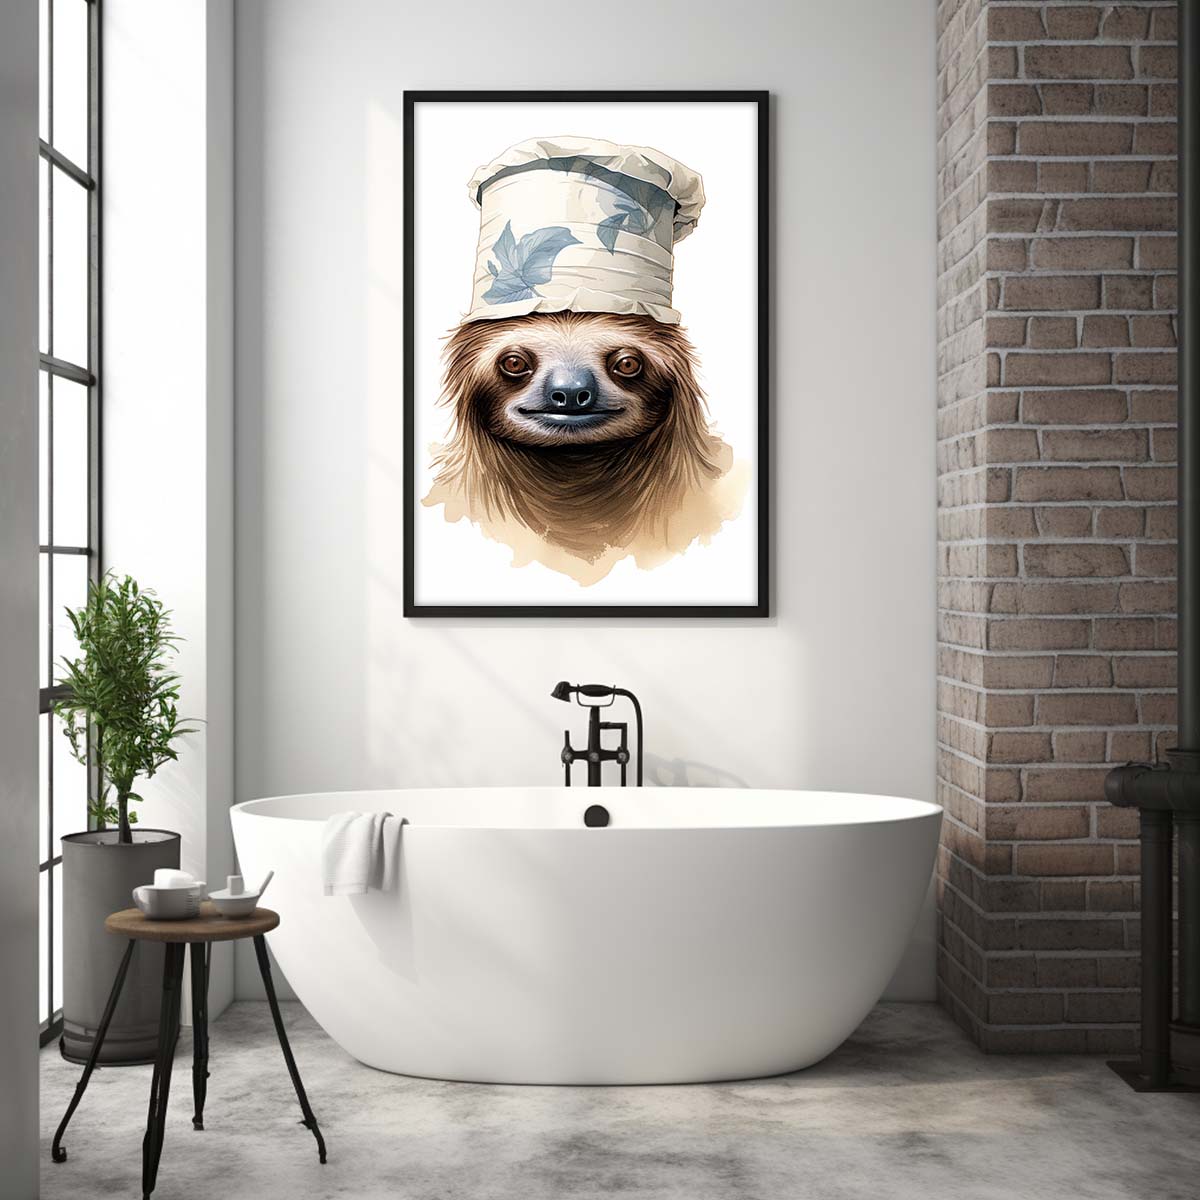 Sloth 01 With Toilet Paper Canvas Art, Sloth With Toilet Paper, Funny Sloth Art, Bathroom Wall Decor, Home Decor, Bathroom Wall Art, Animal Wall Decor, Animal Decor, Animal Gift